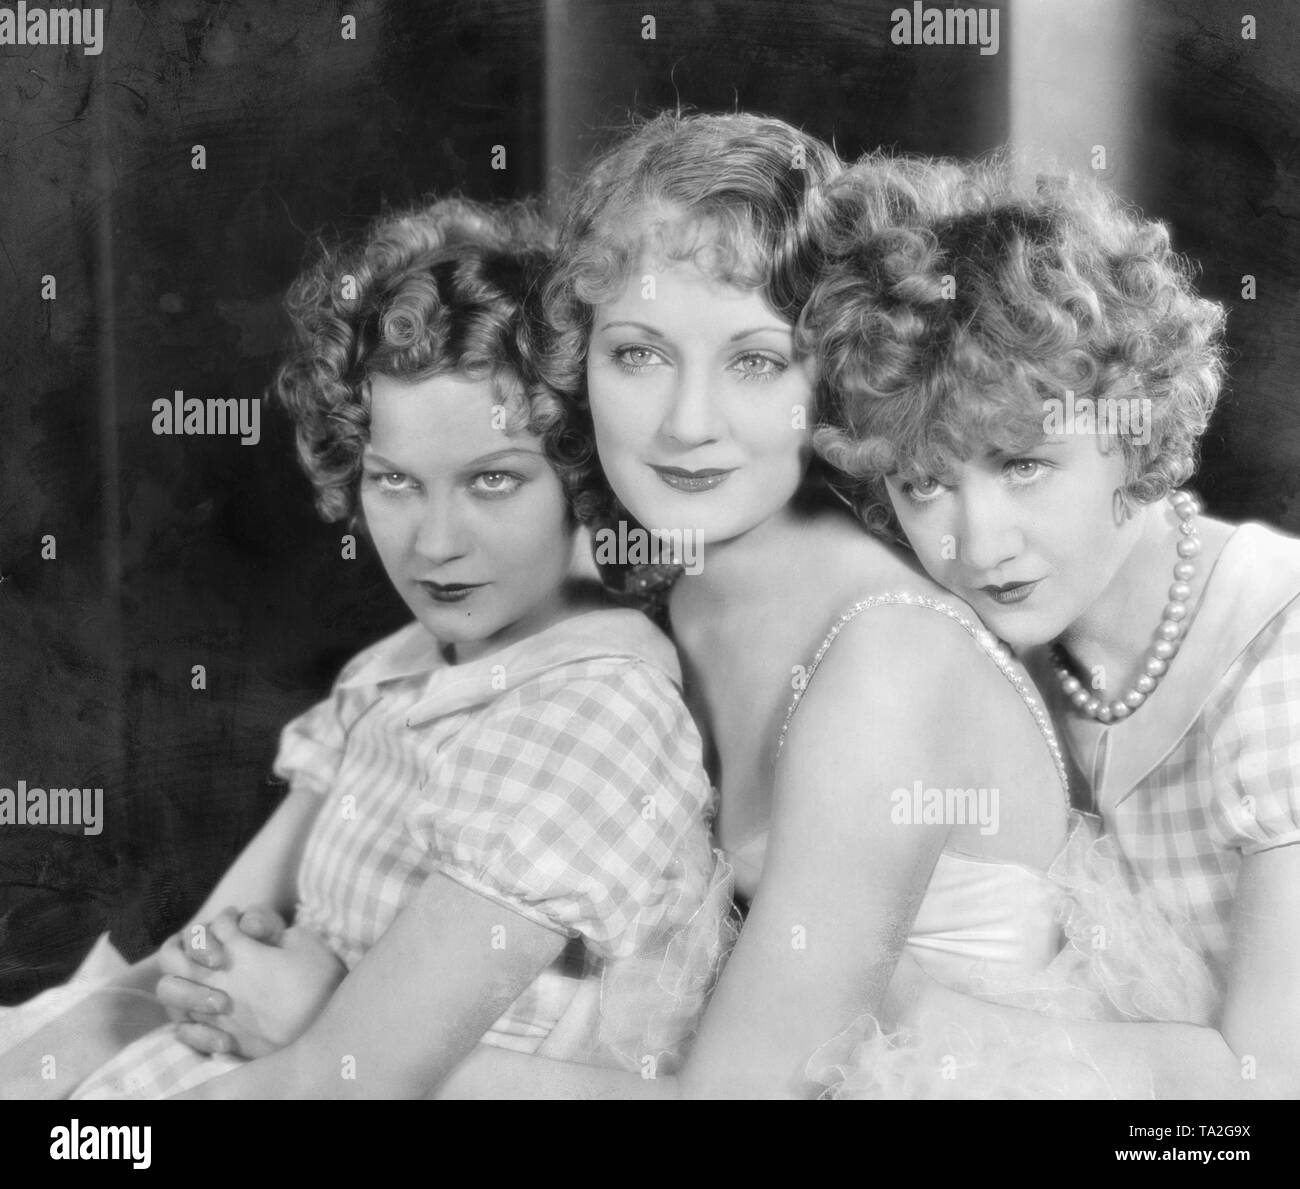 The American actresses (from left) Greta Granstedt, Josephine Dunn and Kathleen Clifford on a group photo. All of them have a short haircut - typical in that period. Stock Photo